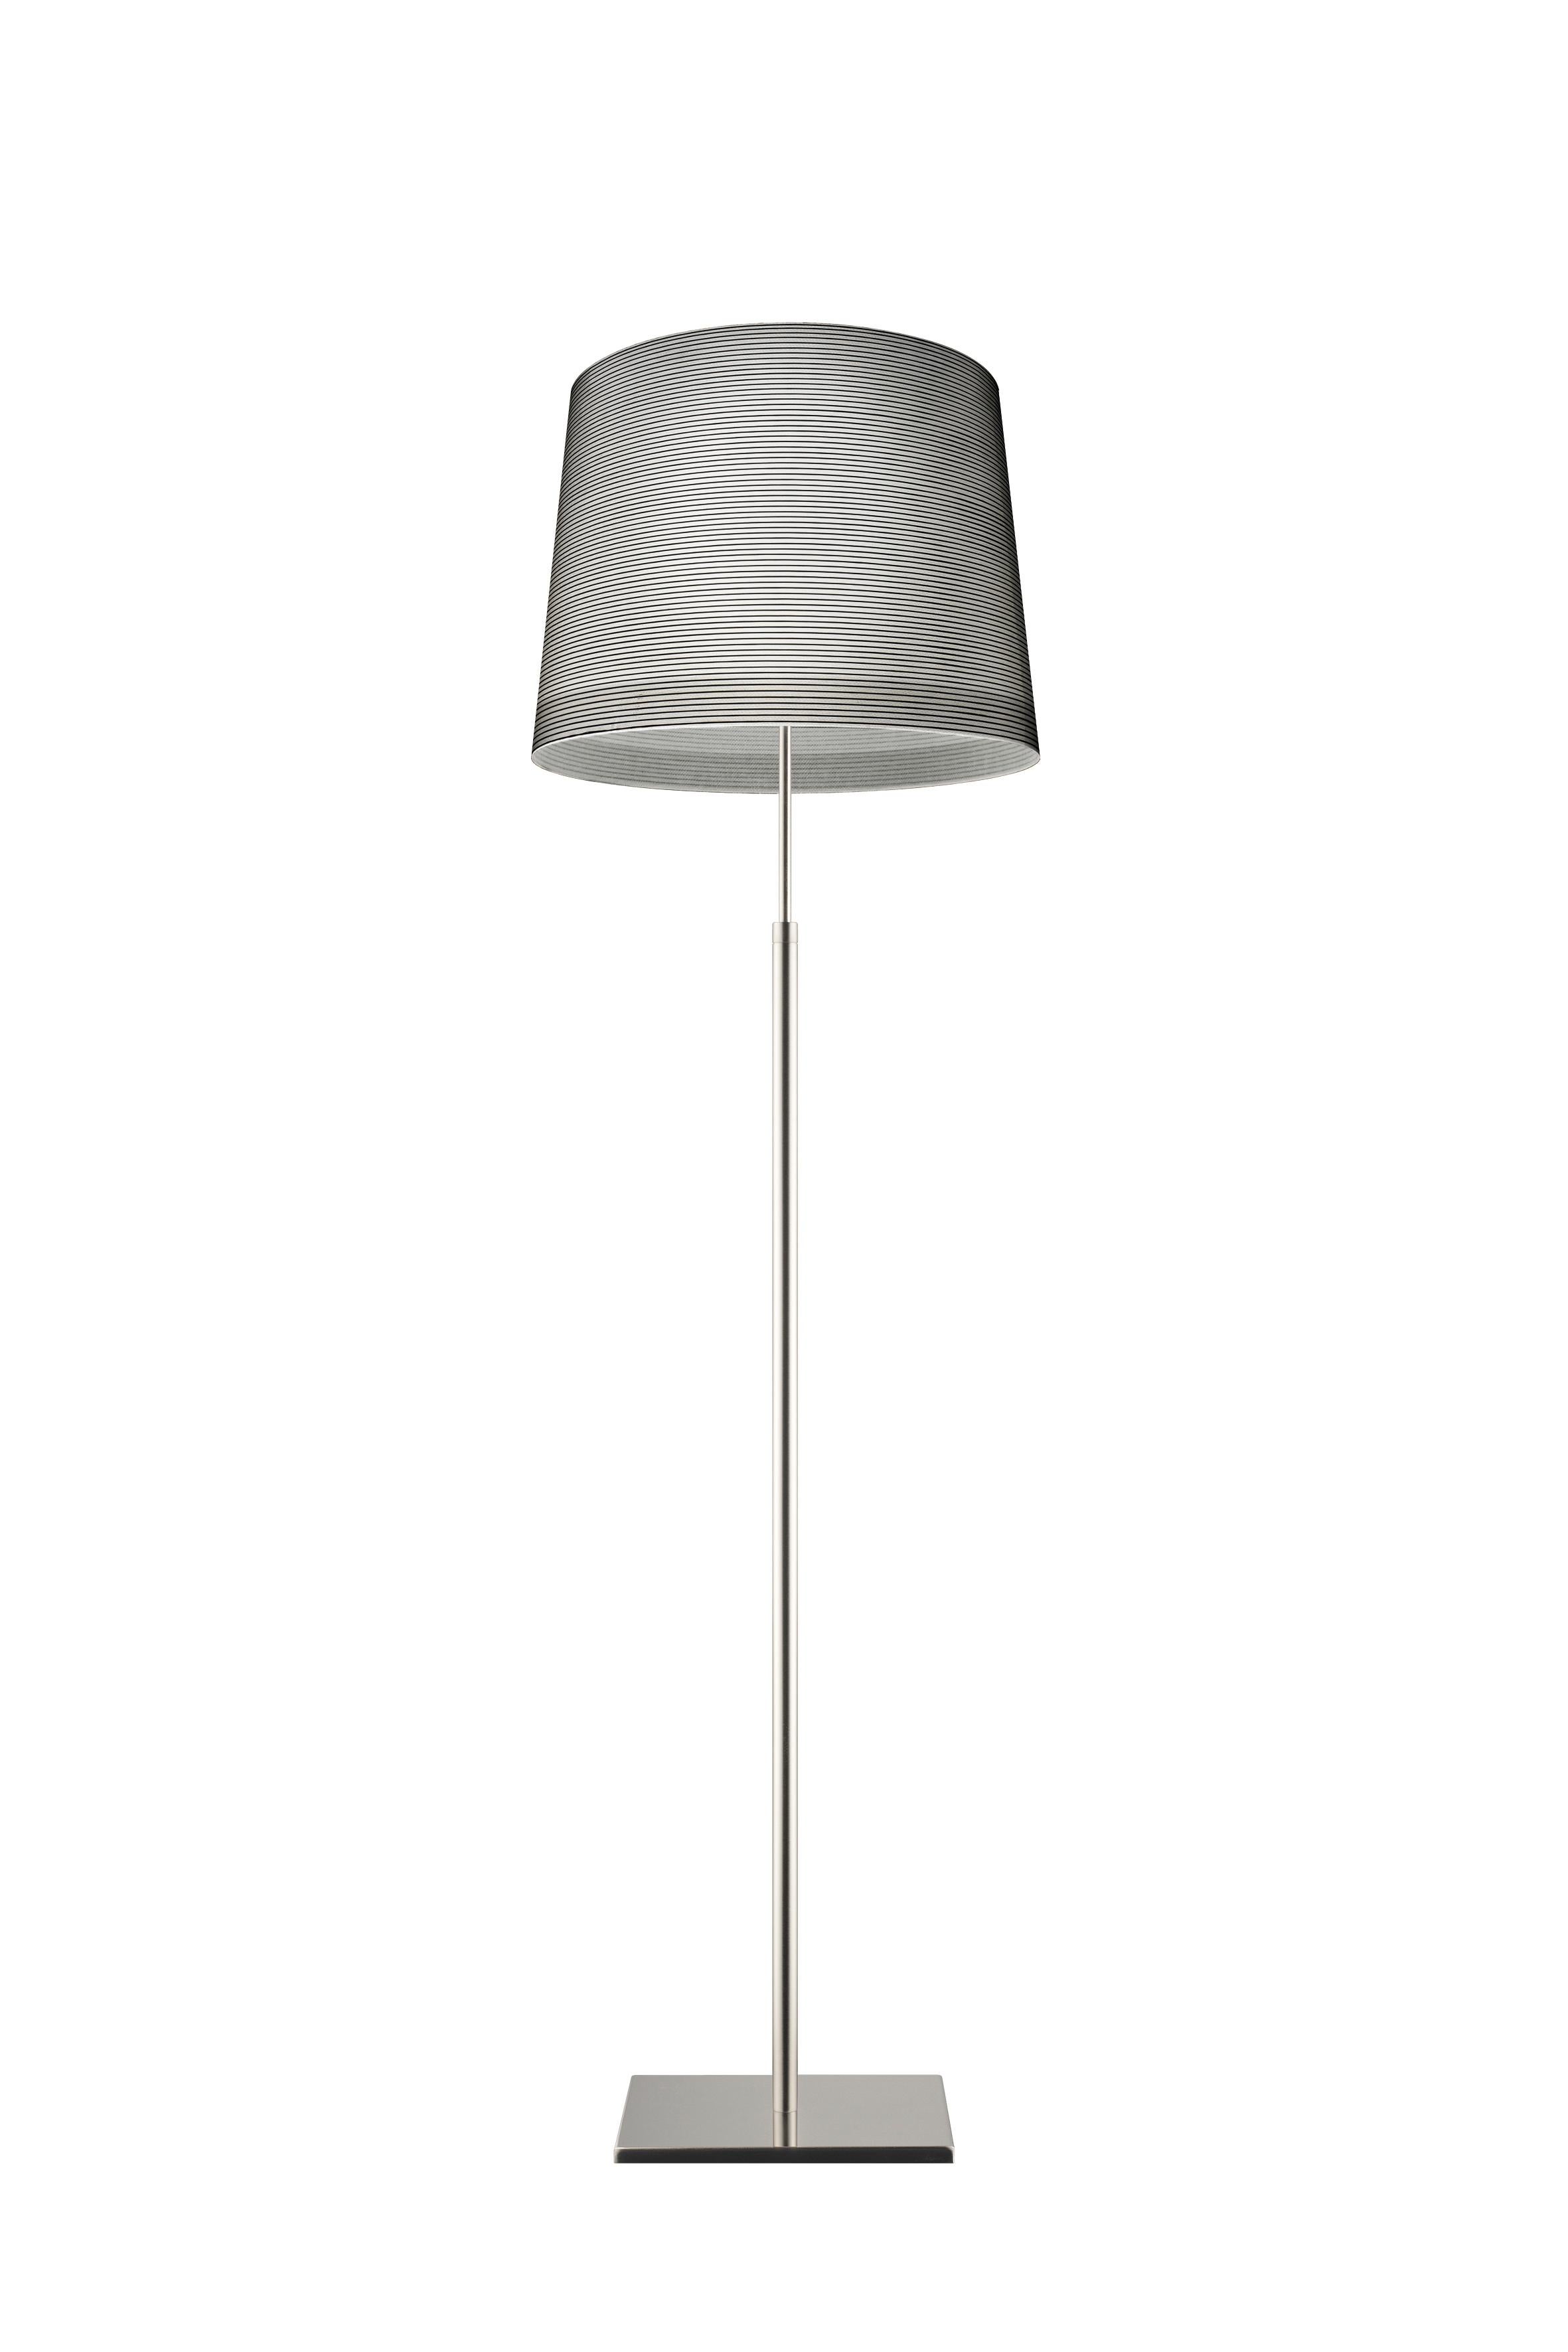 Floor lamp with diffused and direct light. Diffuser achieved using an artisanal process that entails the application of a carbon thread onto a glass fabric. Brushed stainless steel telescopic rod which can be extended by approximately 10 inch. with